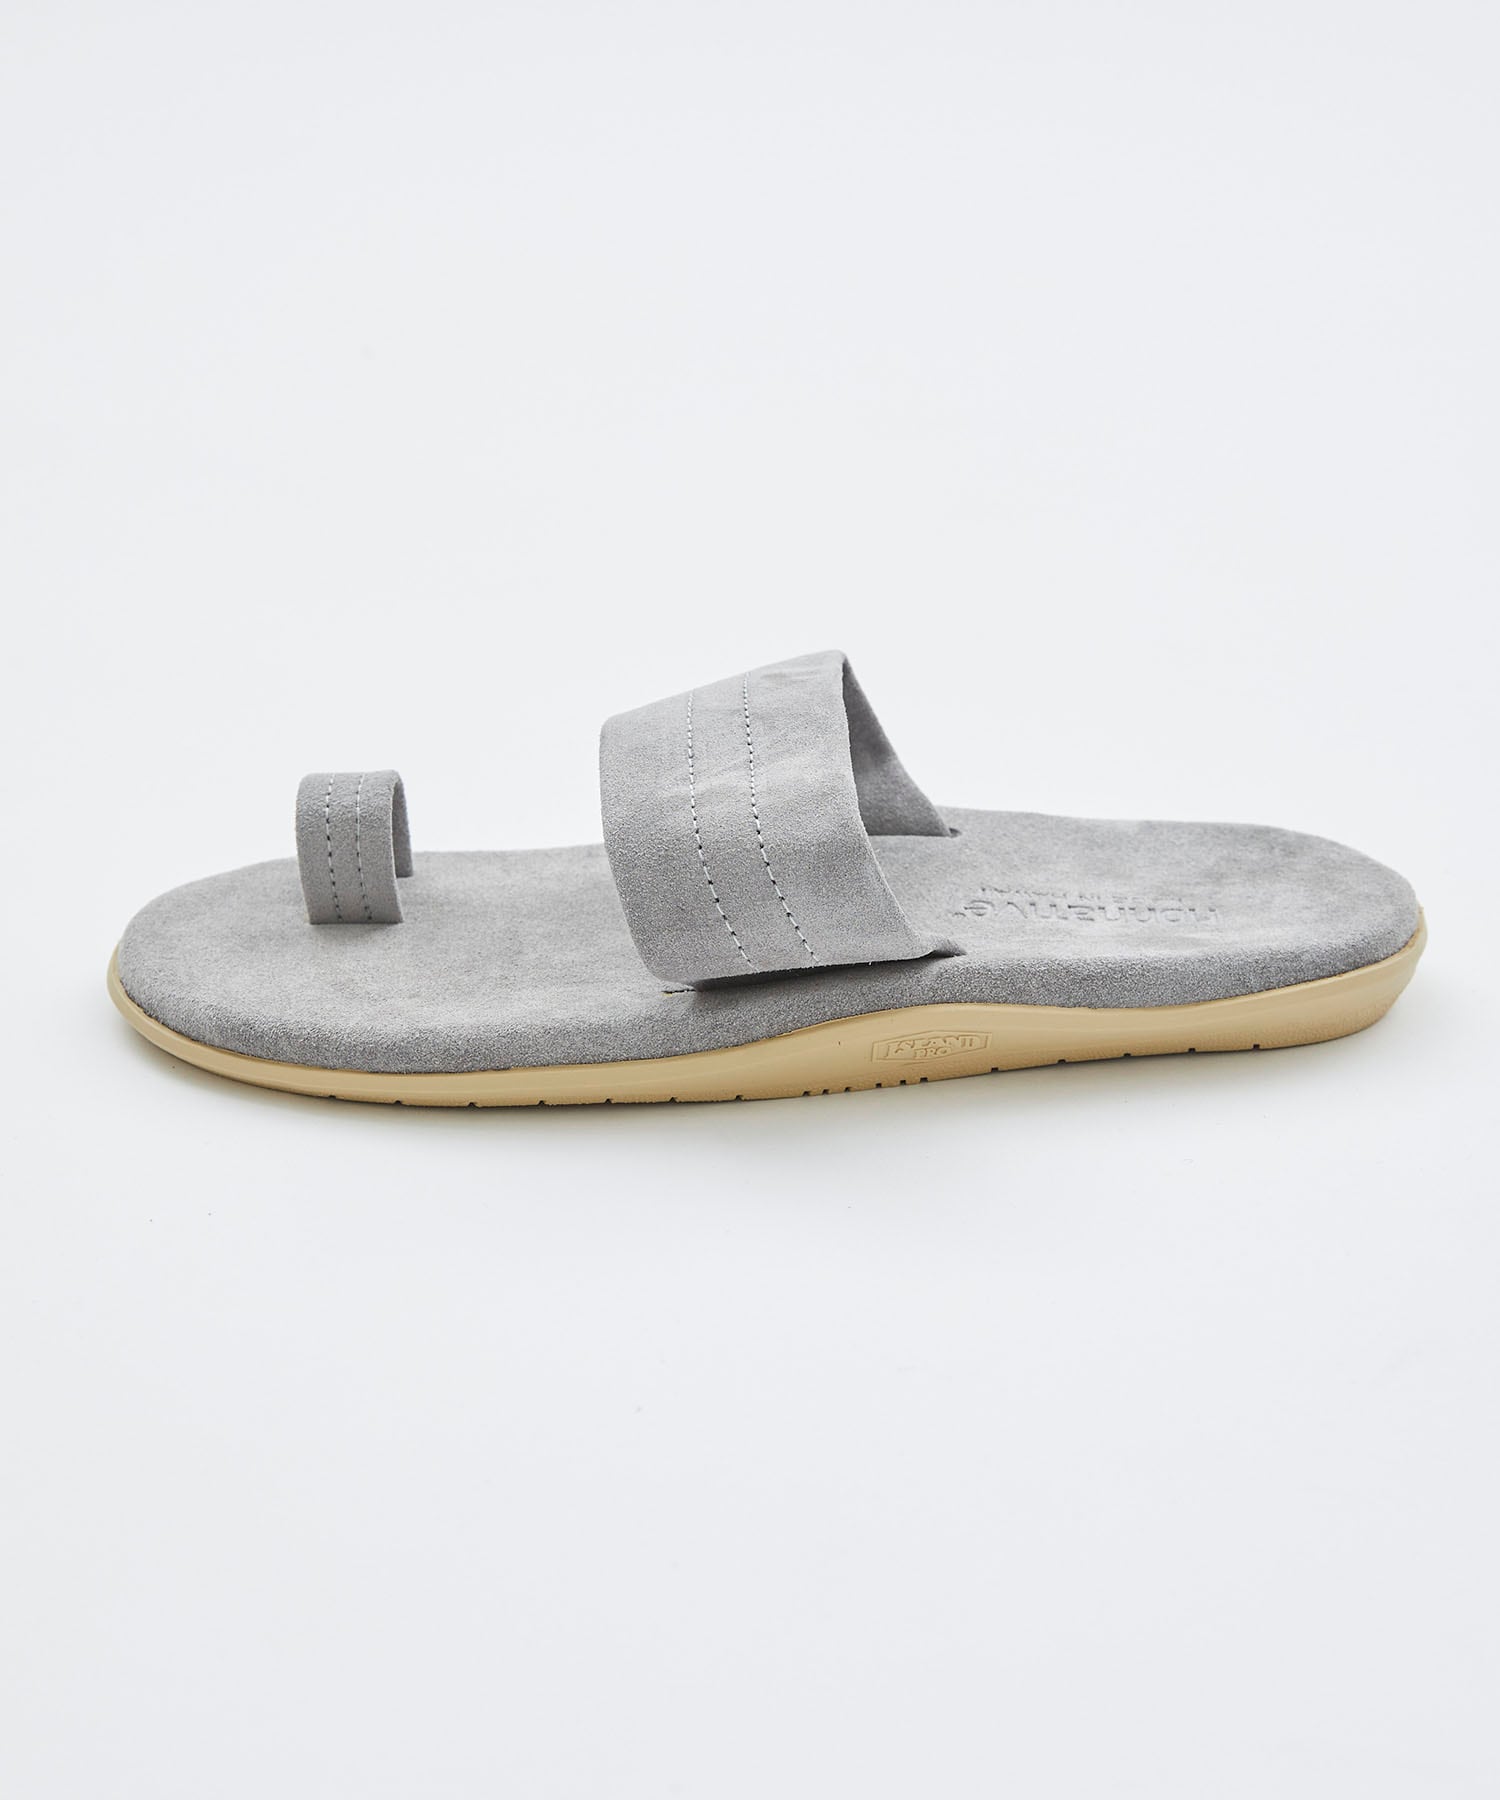 RANCHER SANDAL COW LEATHER BY ISLAND SLIPPER nonnative